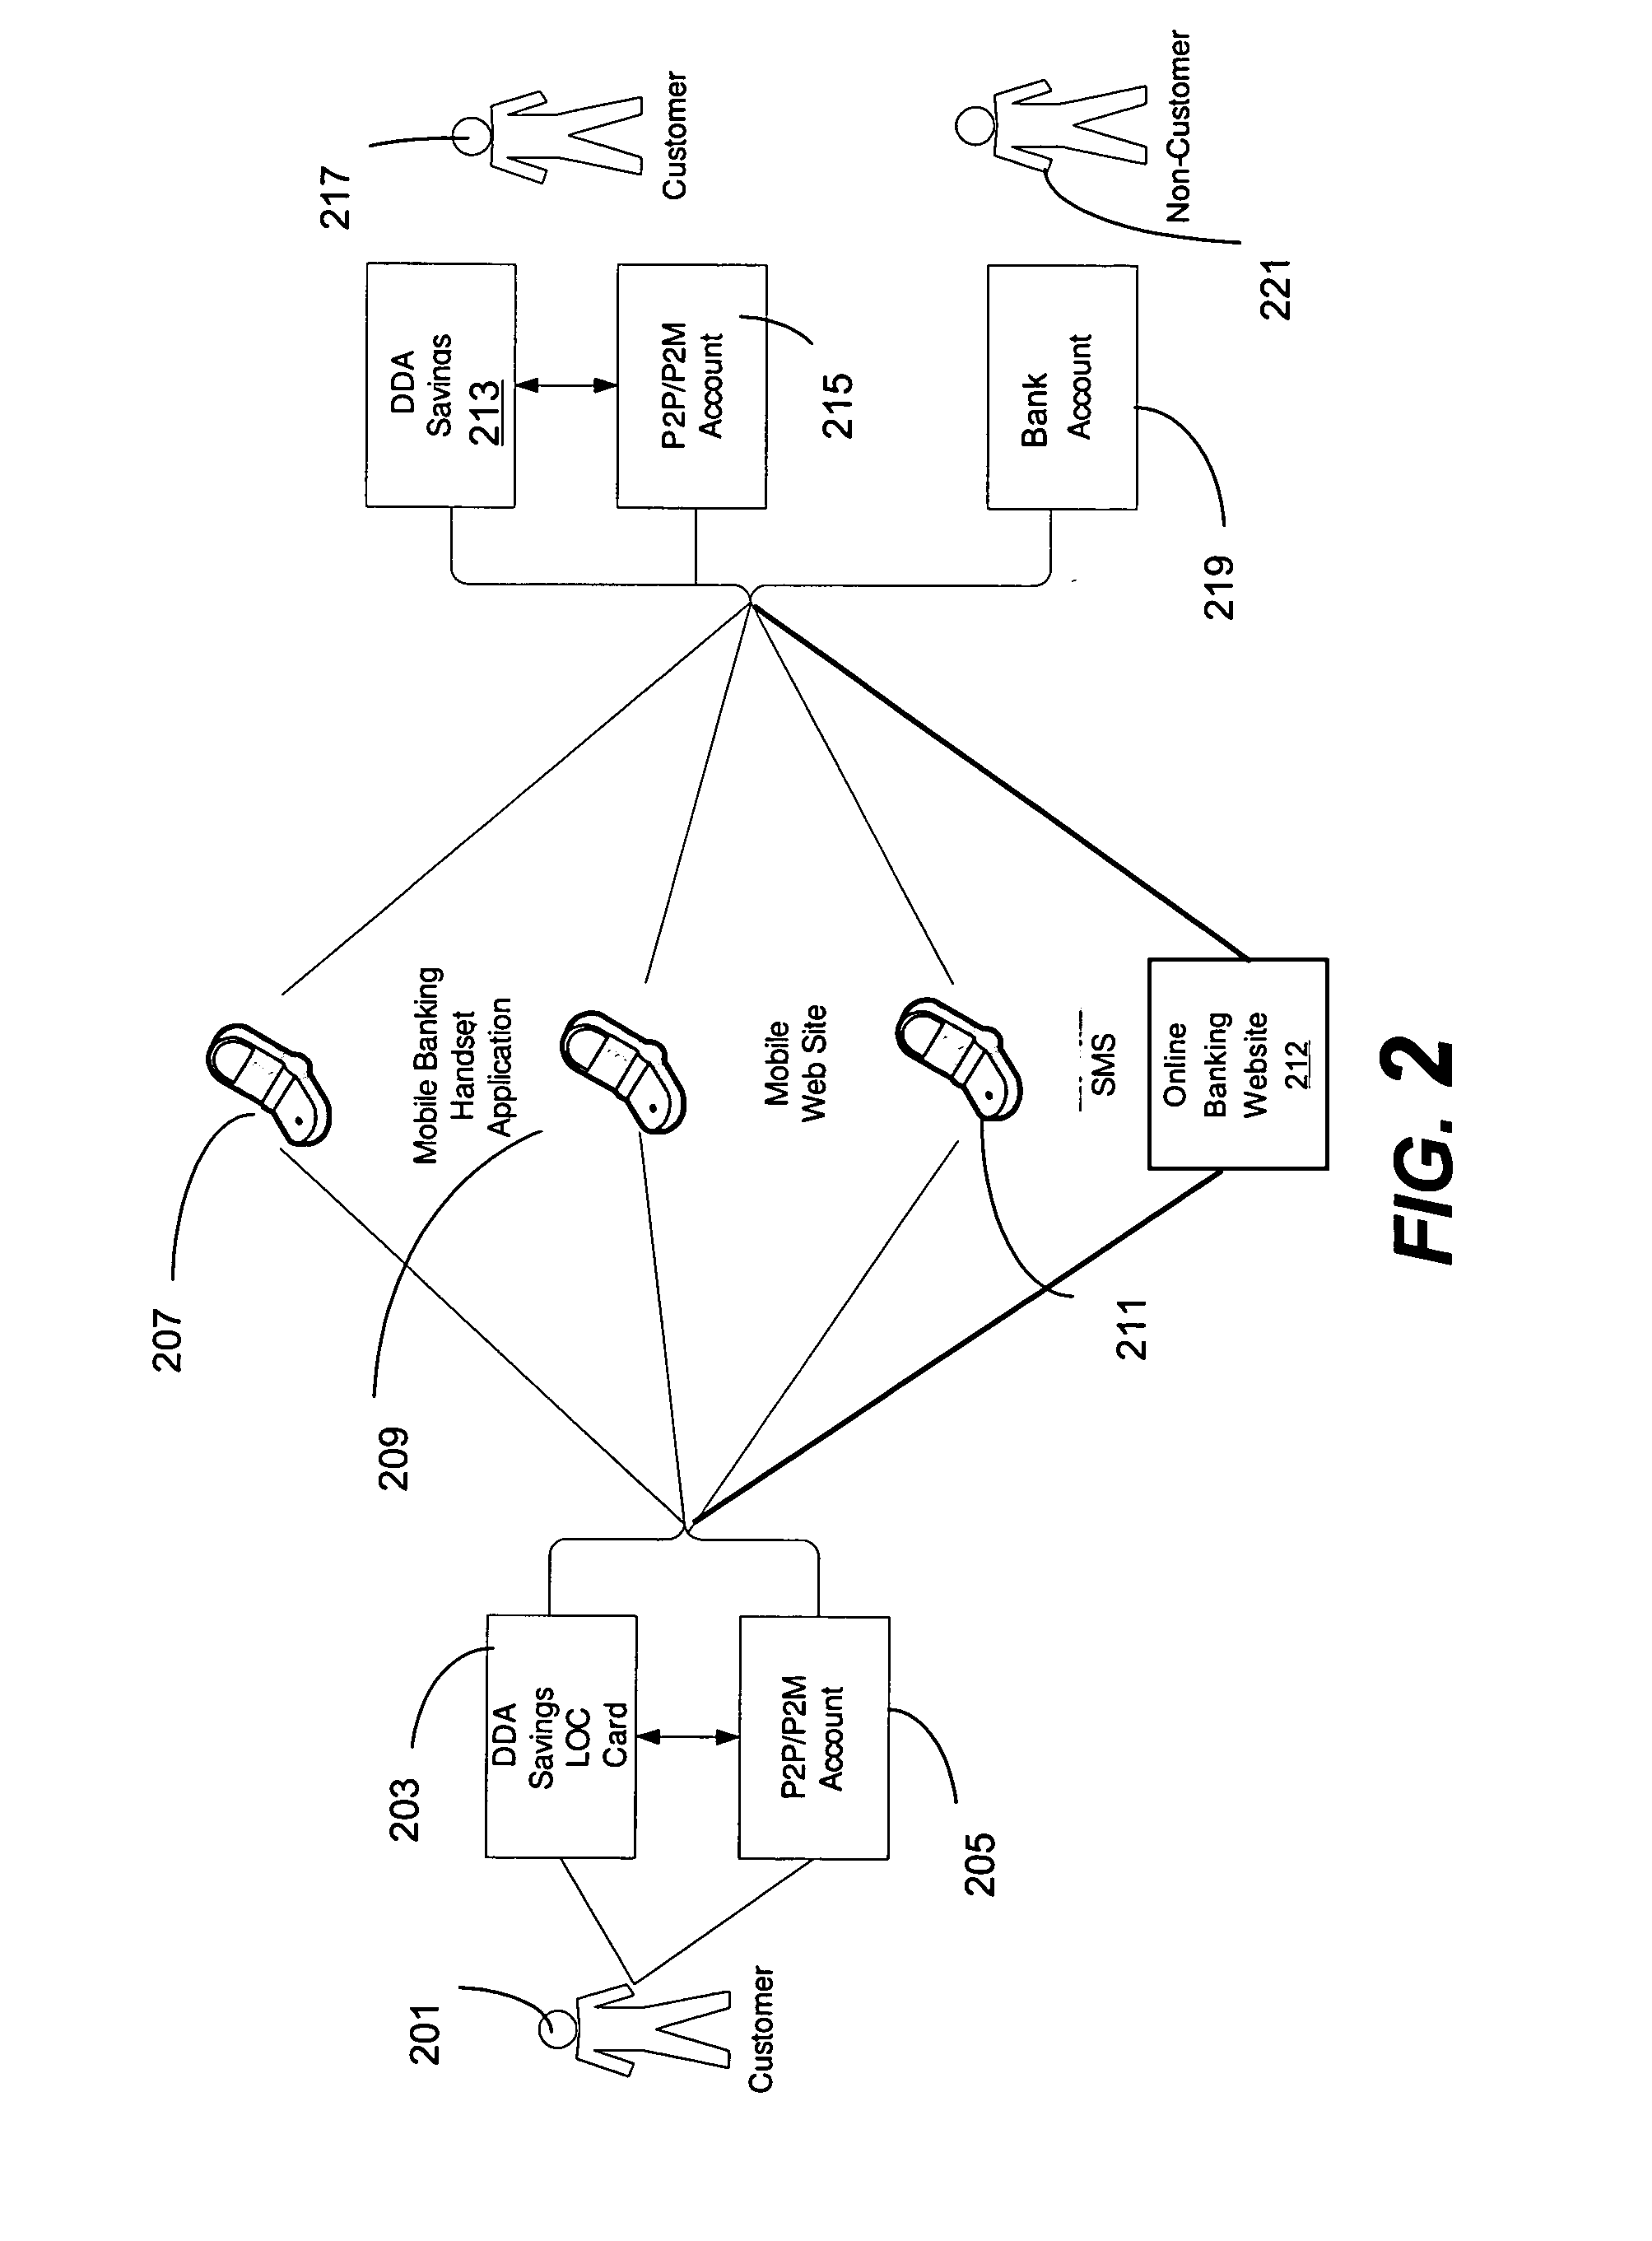 Mobile payment system and method